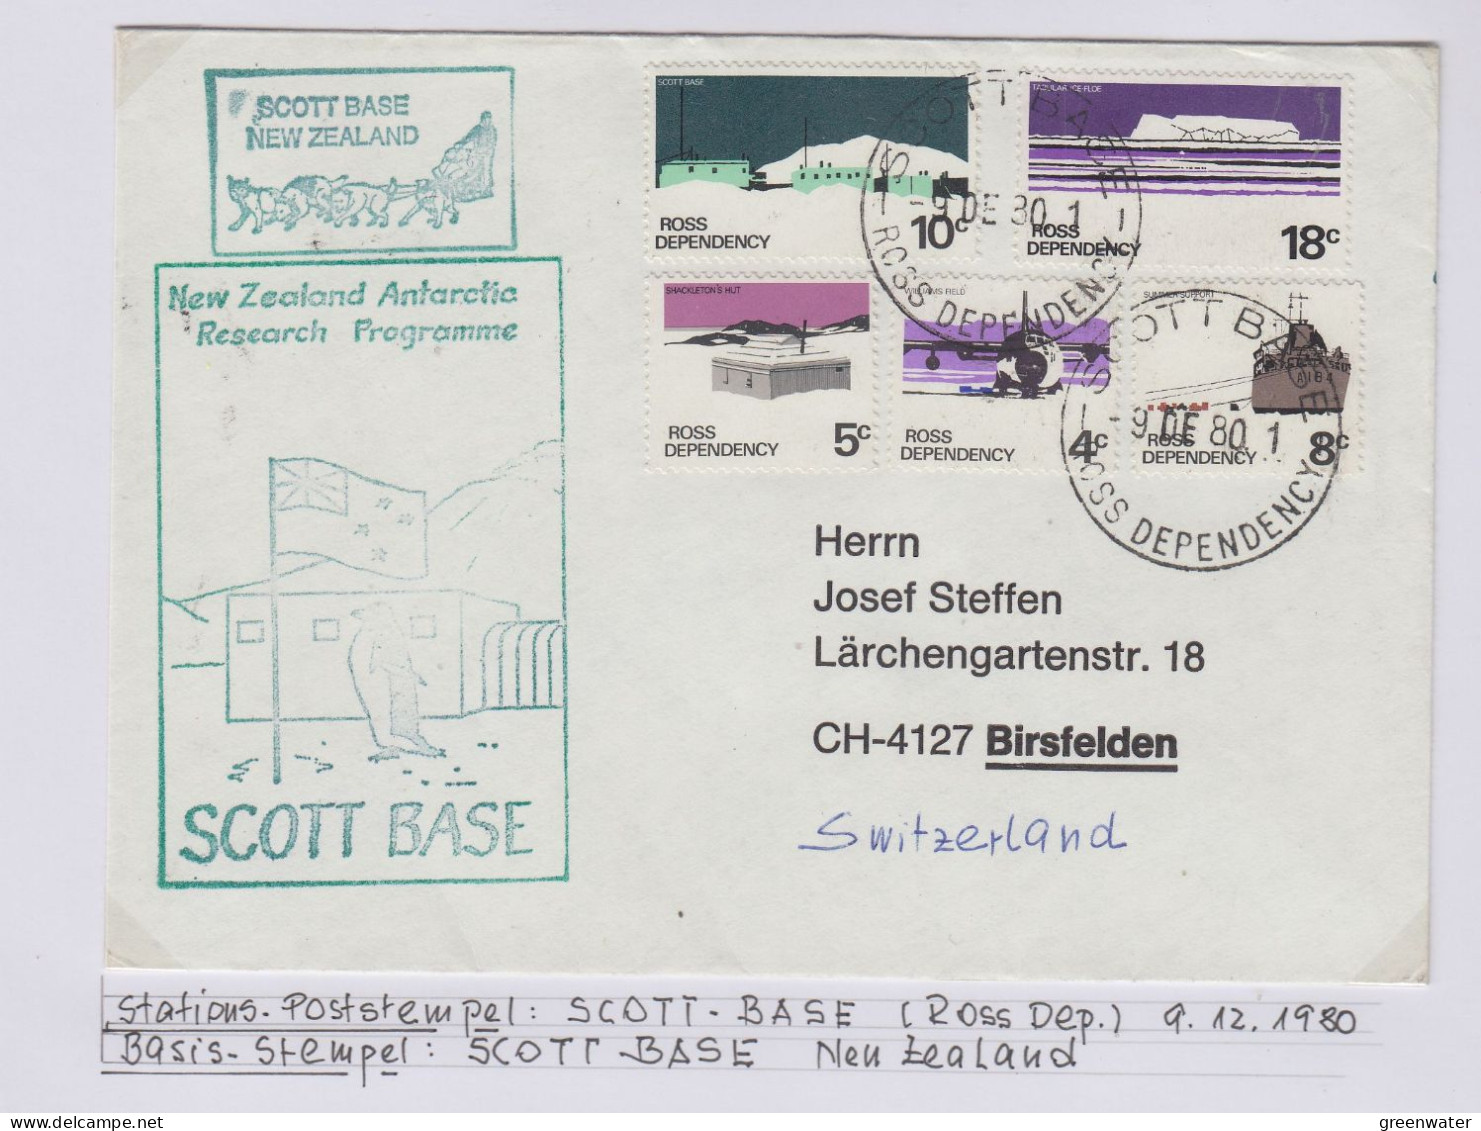 Ross Dependency Cover  NZ  Antarctic Research  Expedition Ca Scott Base 9 DE 1980 (WB161) - Covers & Documents